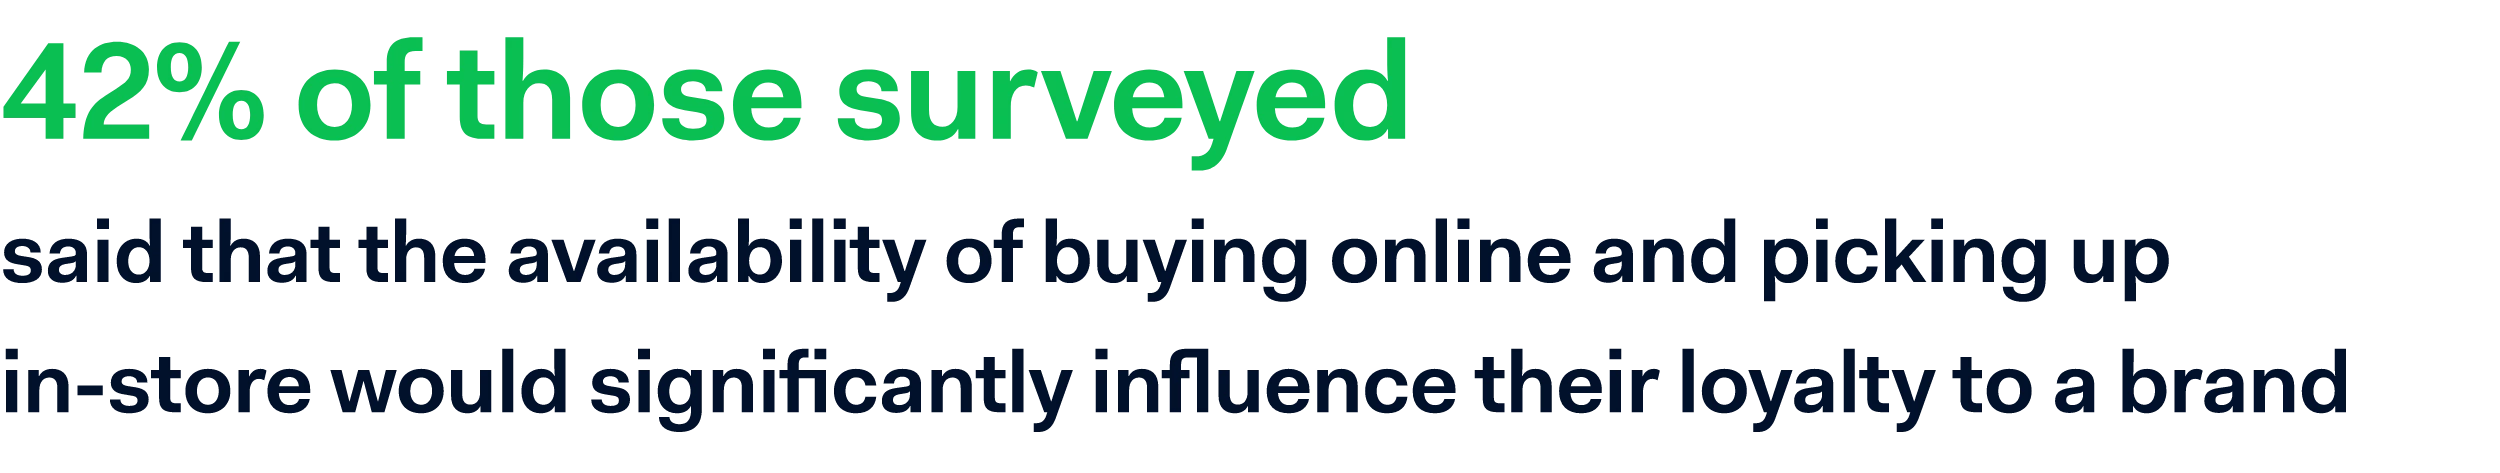 Nearly half (42%) of those surveyed said that the availability of buying online and picking up in-store would significantly influence their loyalty to a brand.